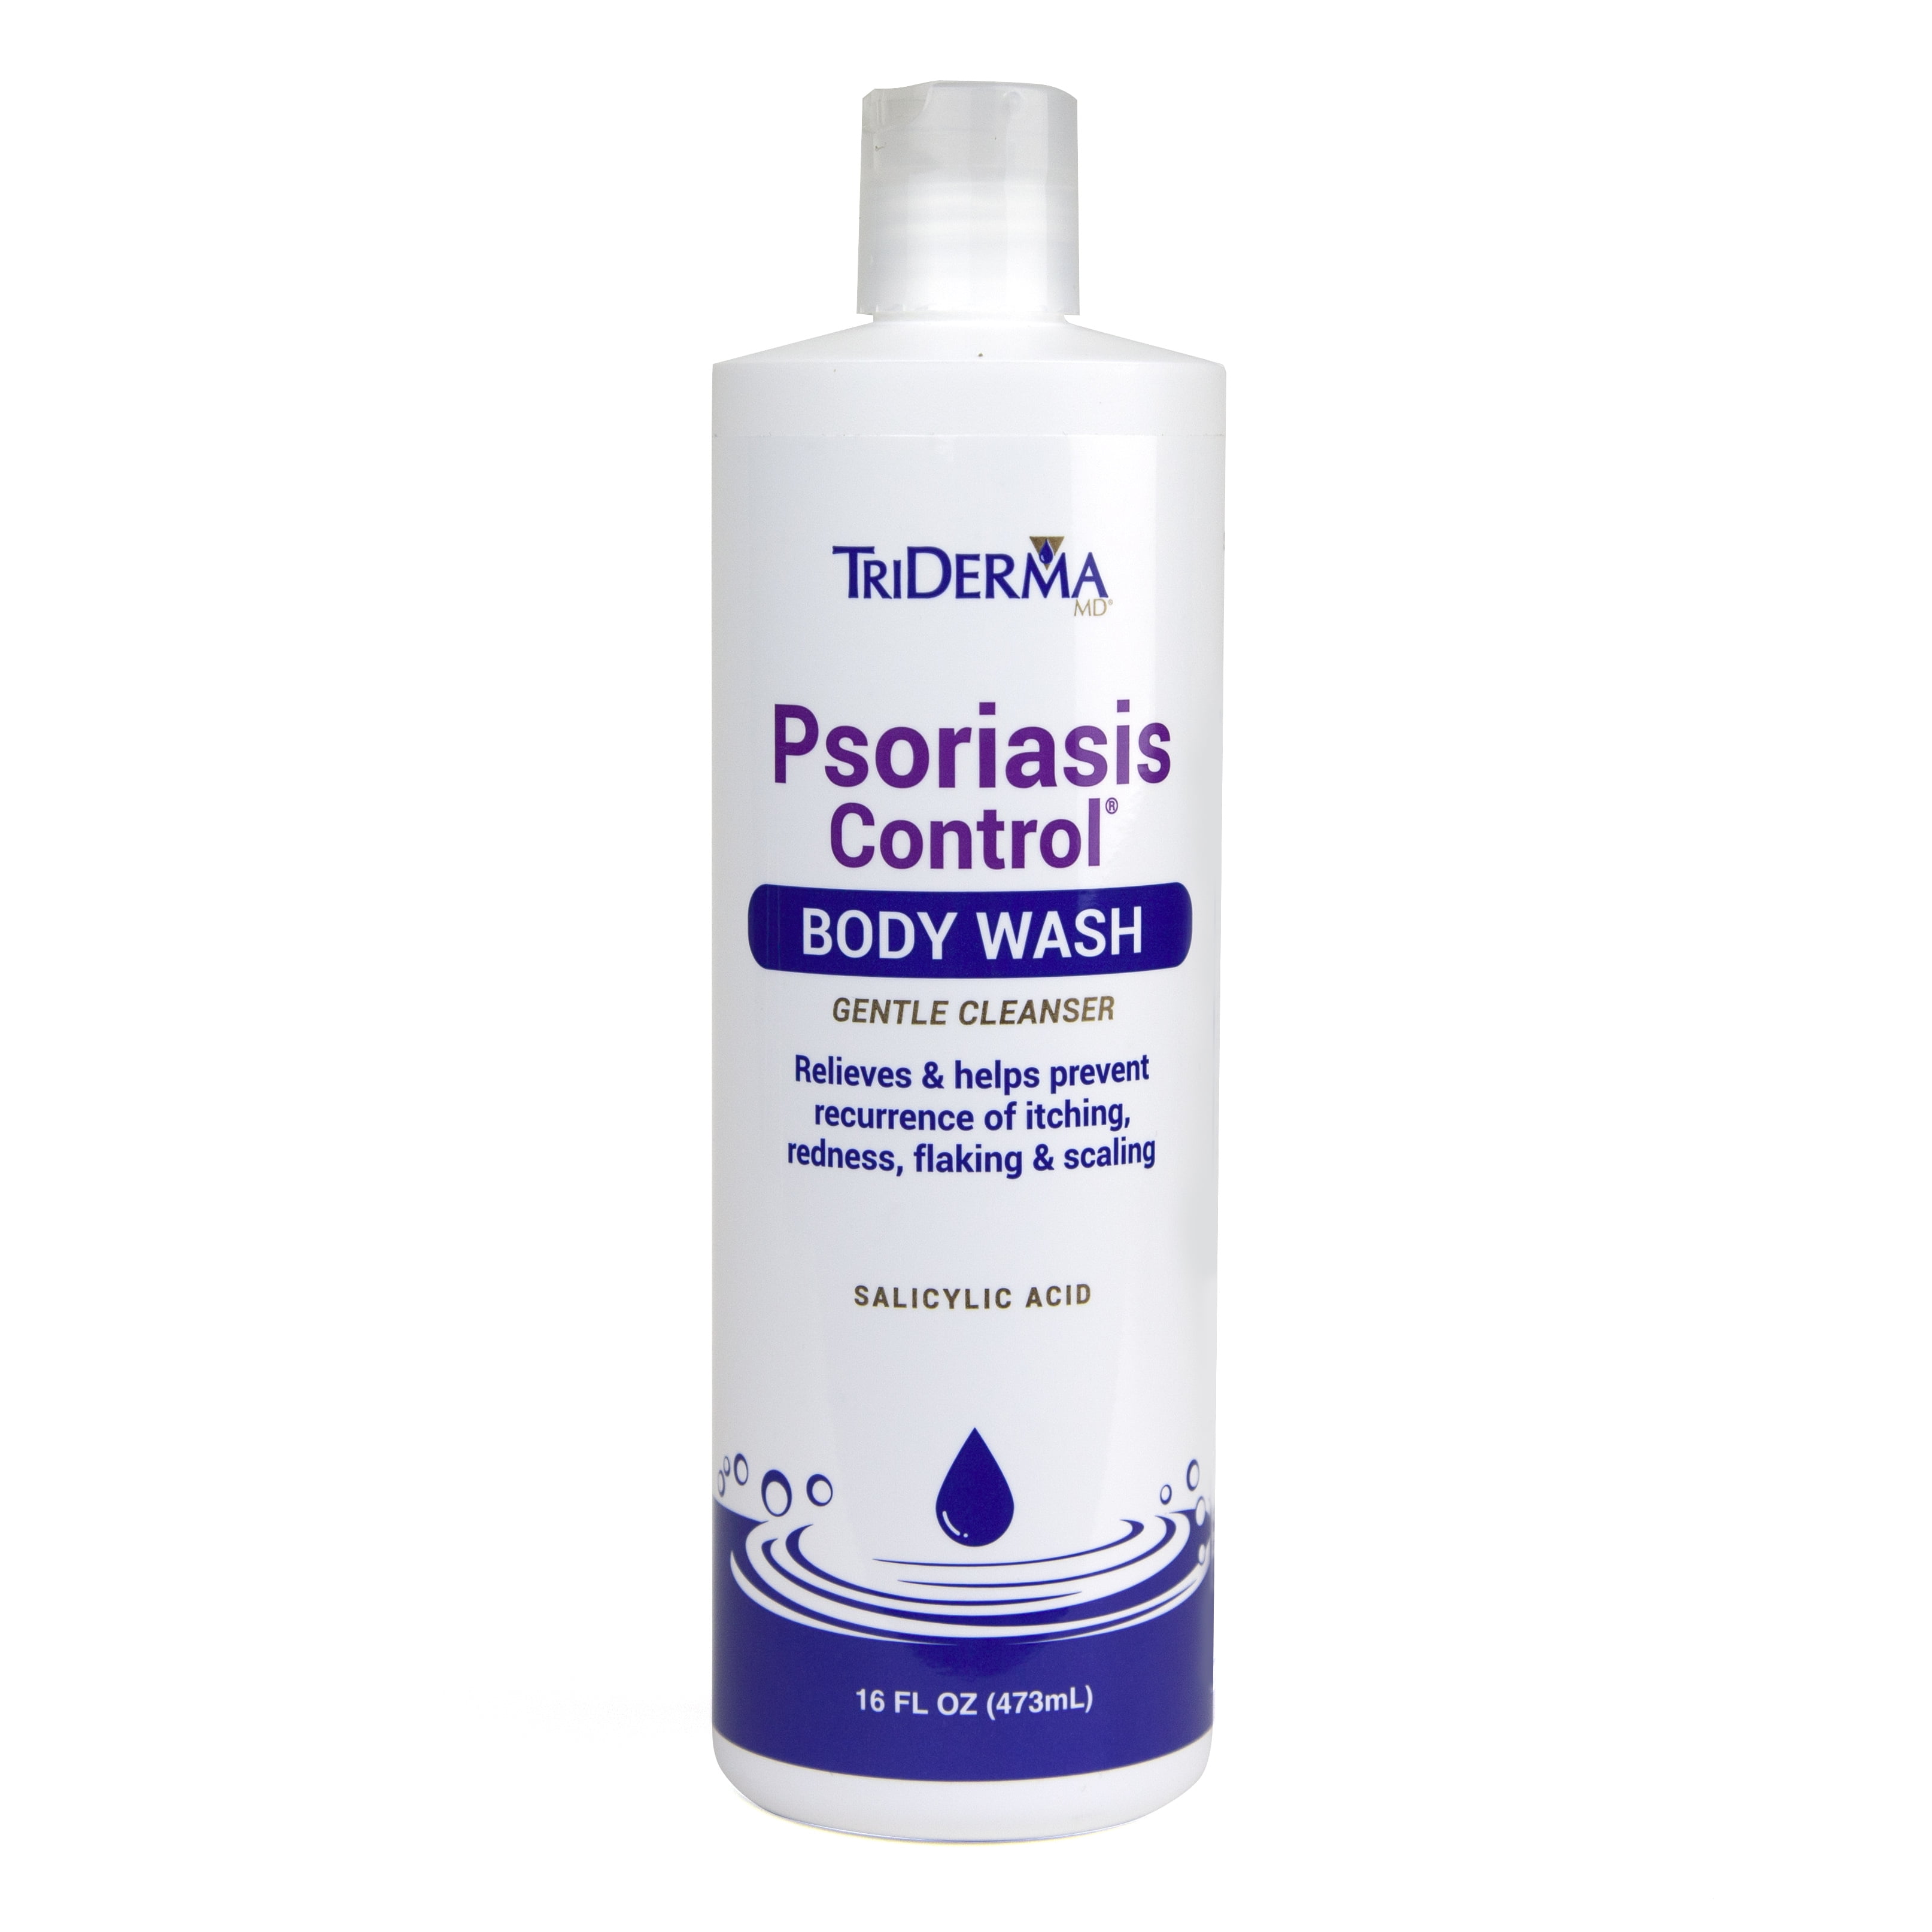 body wash for psoriasis